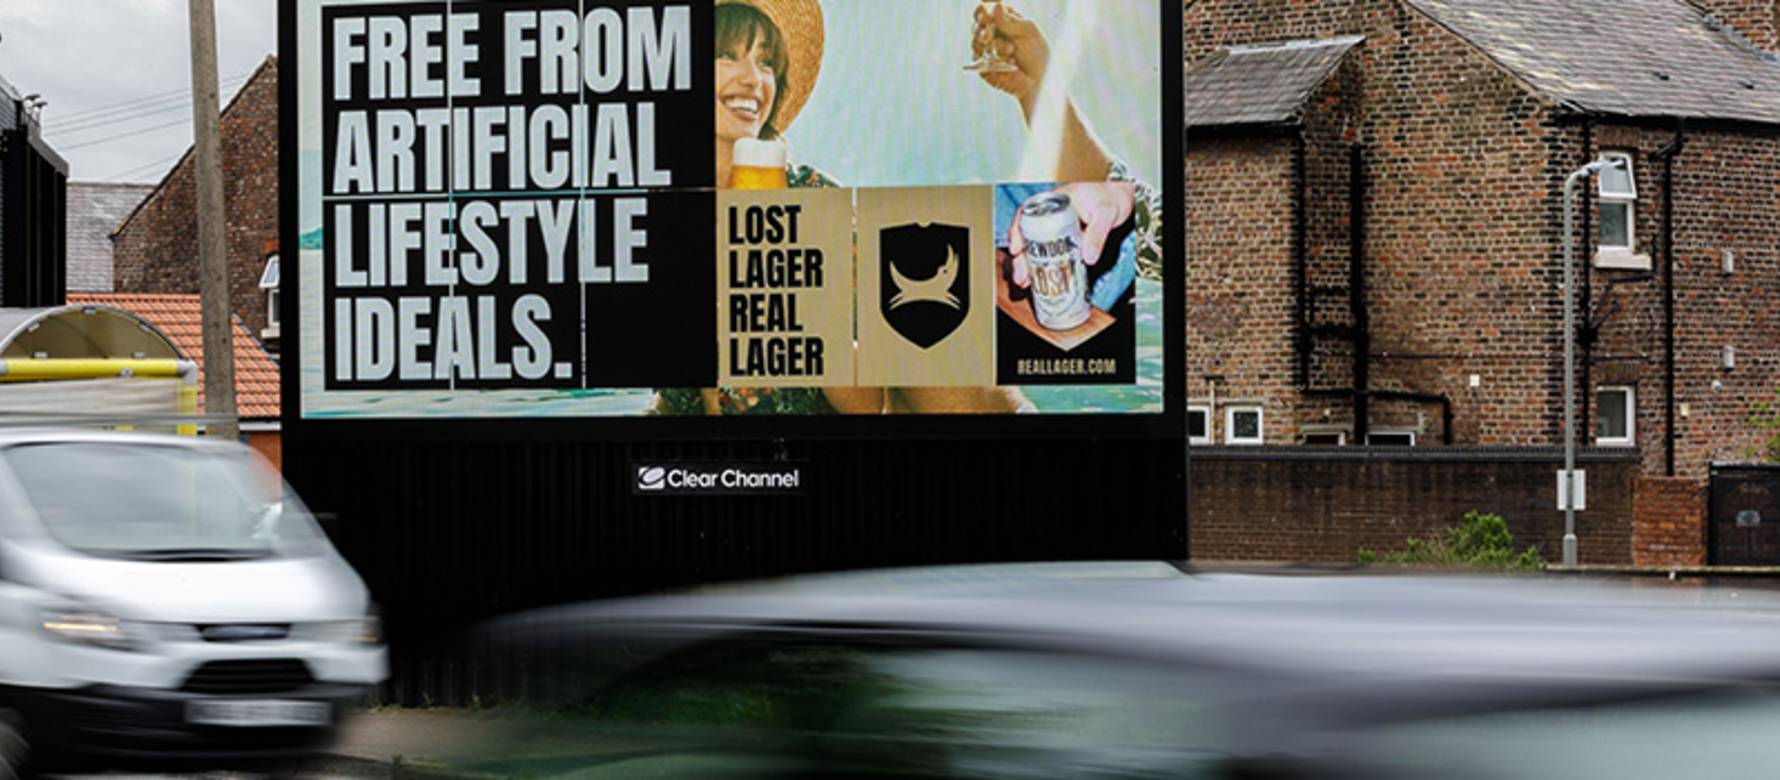 BrewDog campaign that says, free from artificial lifestyle ideals. Lost lager real lager